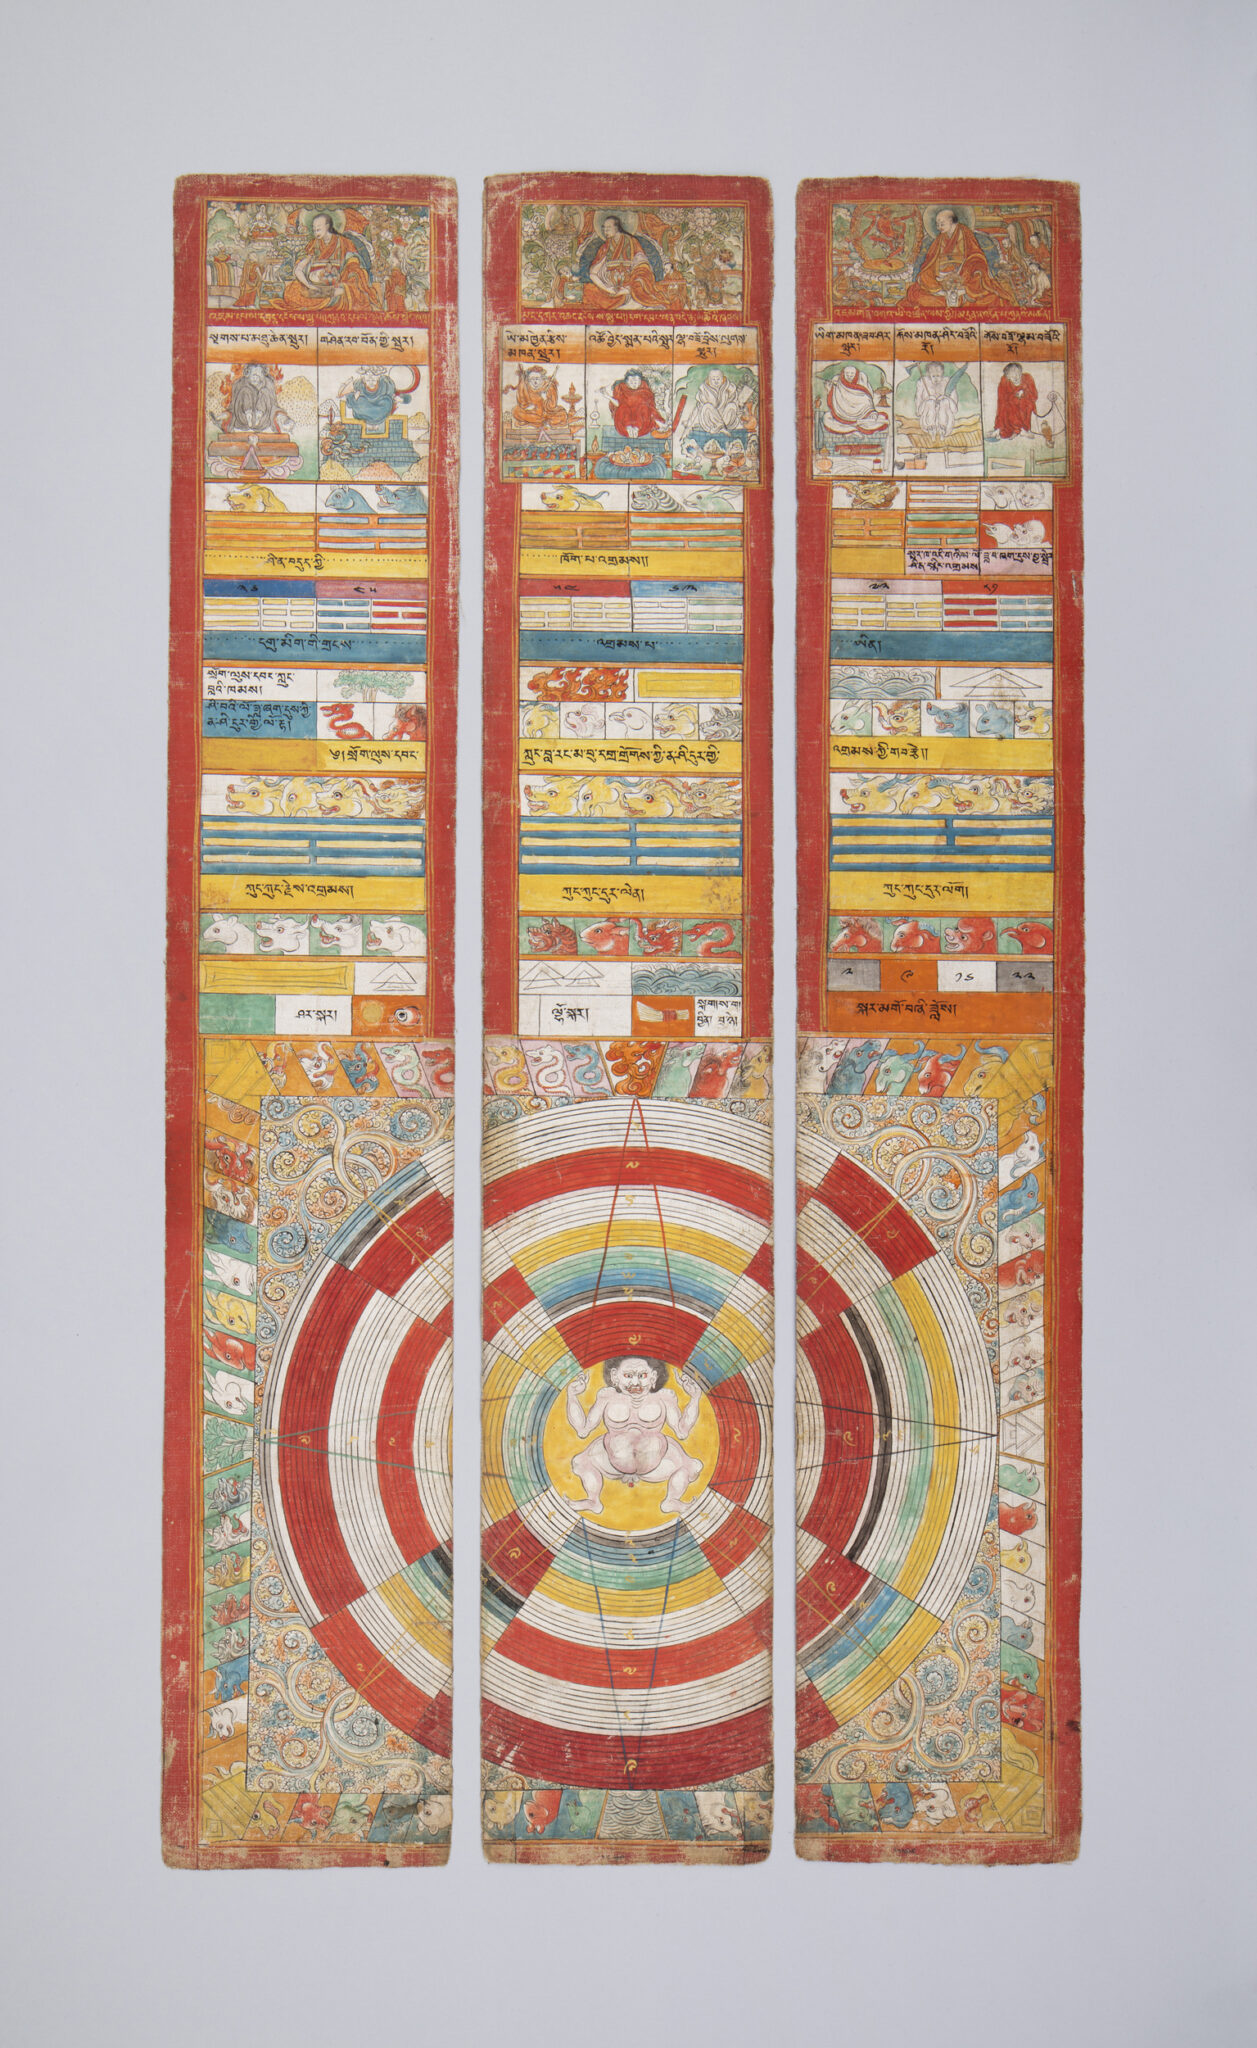 Three long, rectangular folios arranged side-by-side; text and illuminations at top, concentric circular diagram at bottom